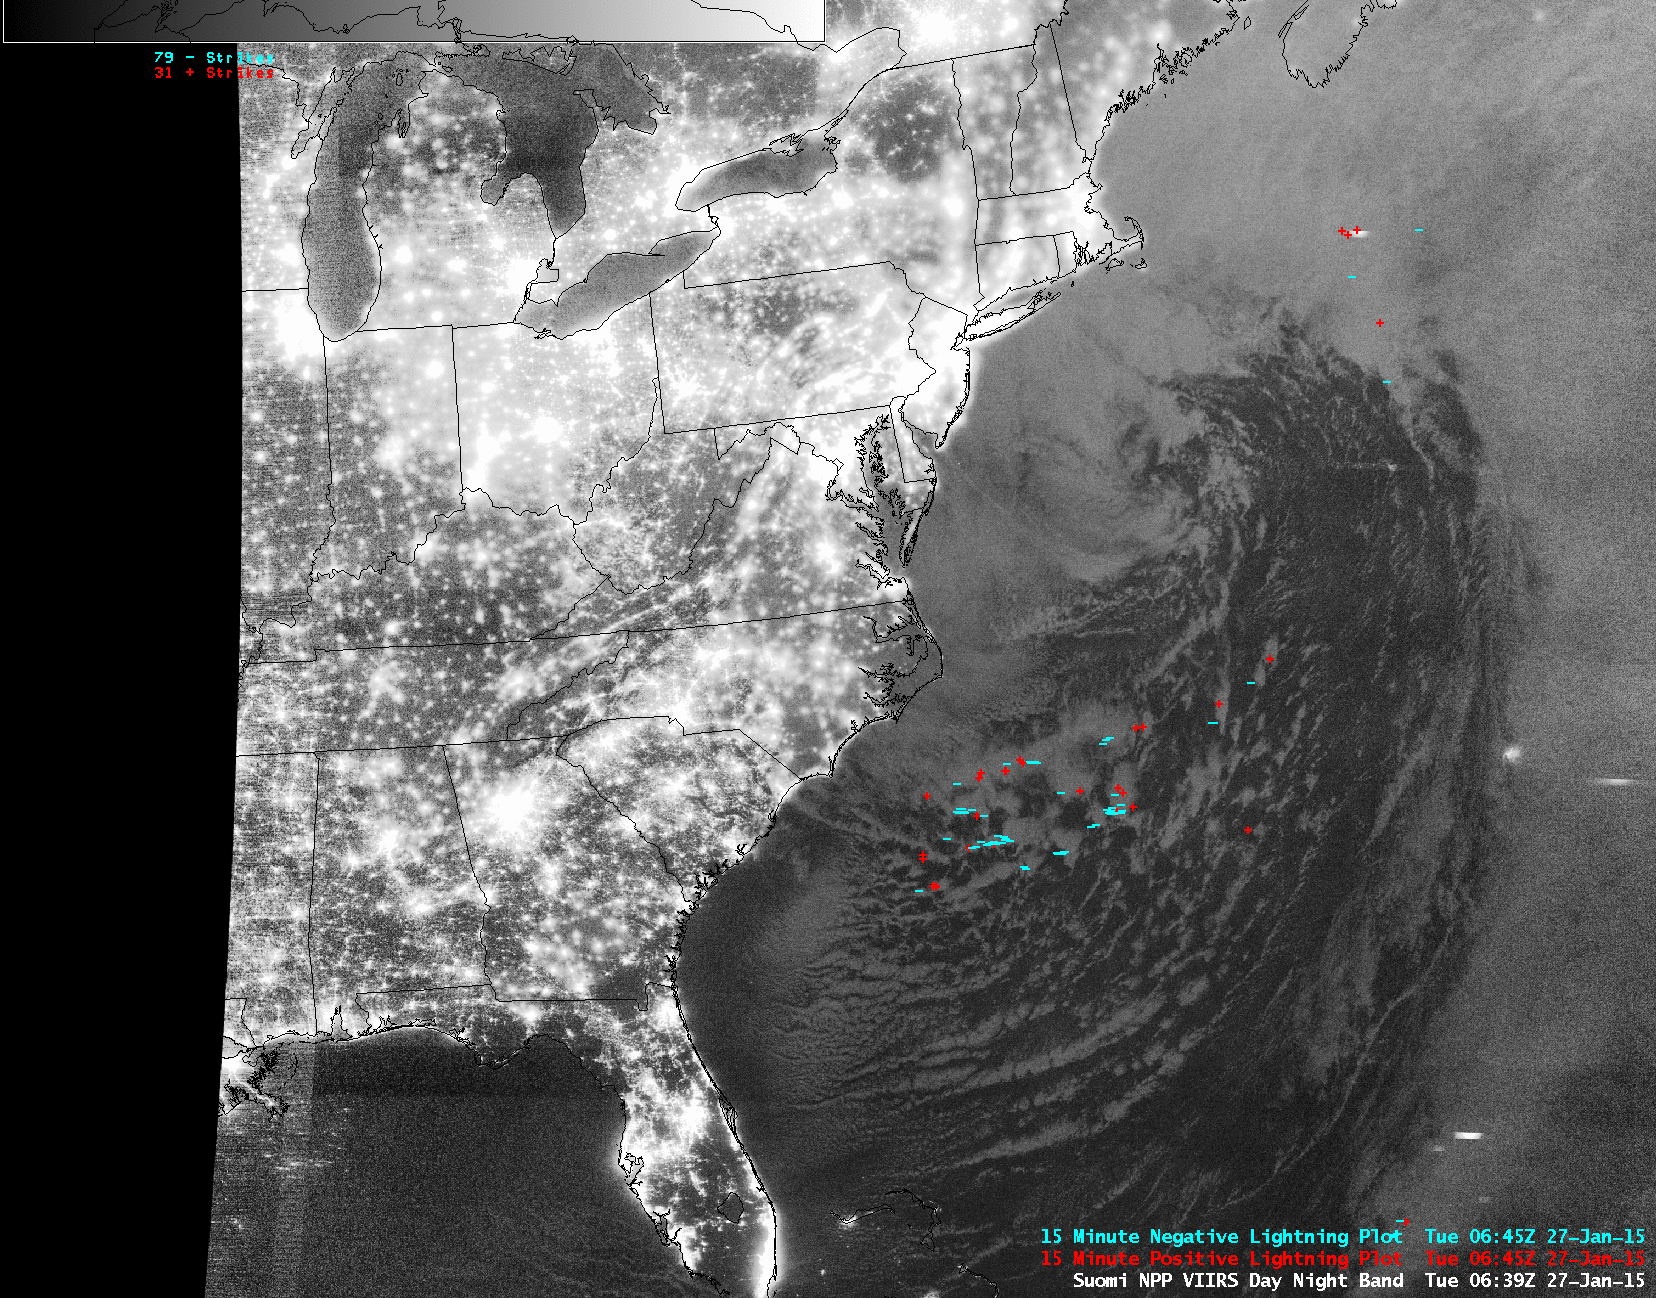 Suomi NPP VIIRS 0.7 µm Day/Night Band and 11.45 µm IR channel images (with cloud-to-ground lightning strikes)